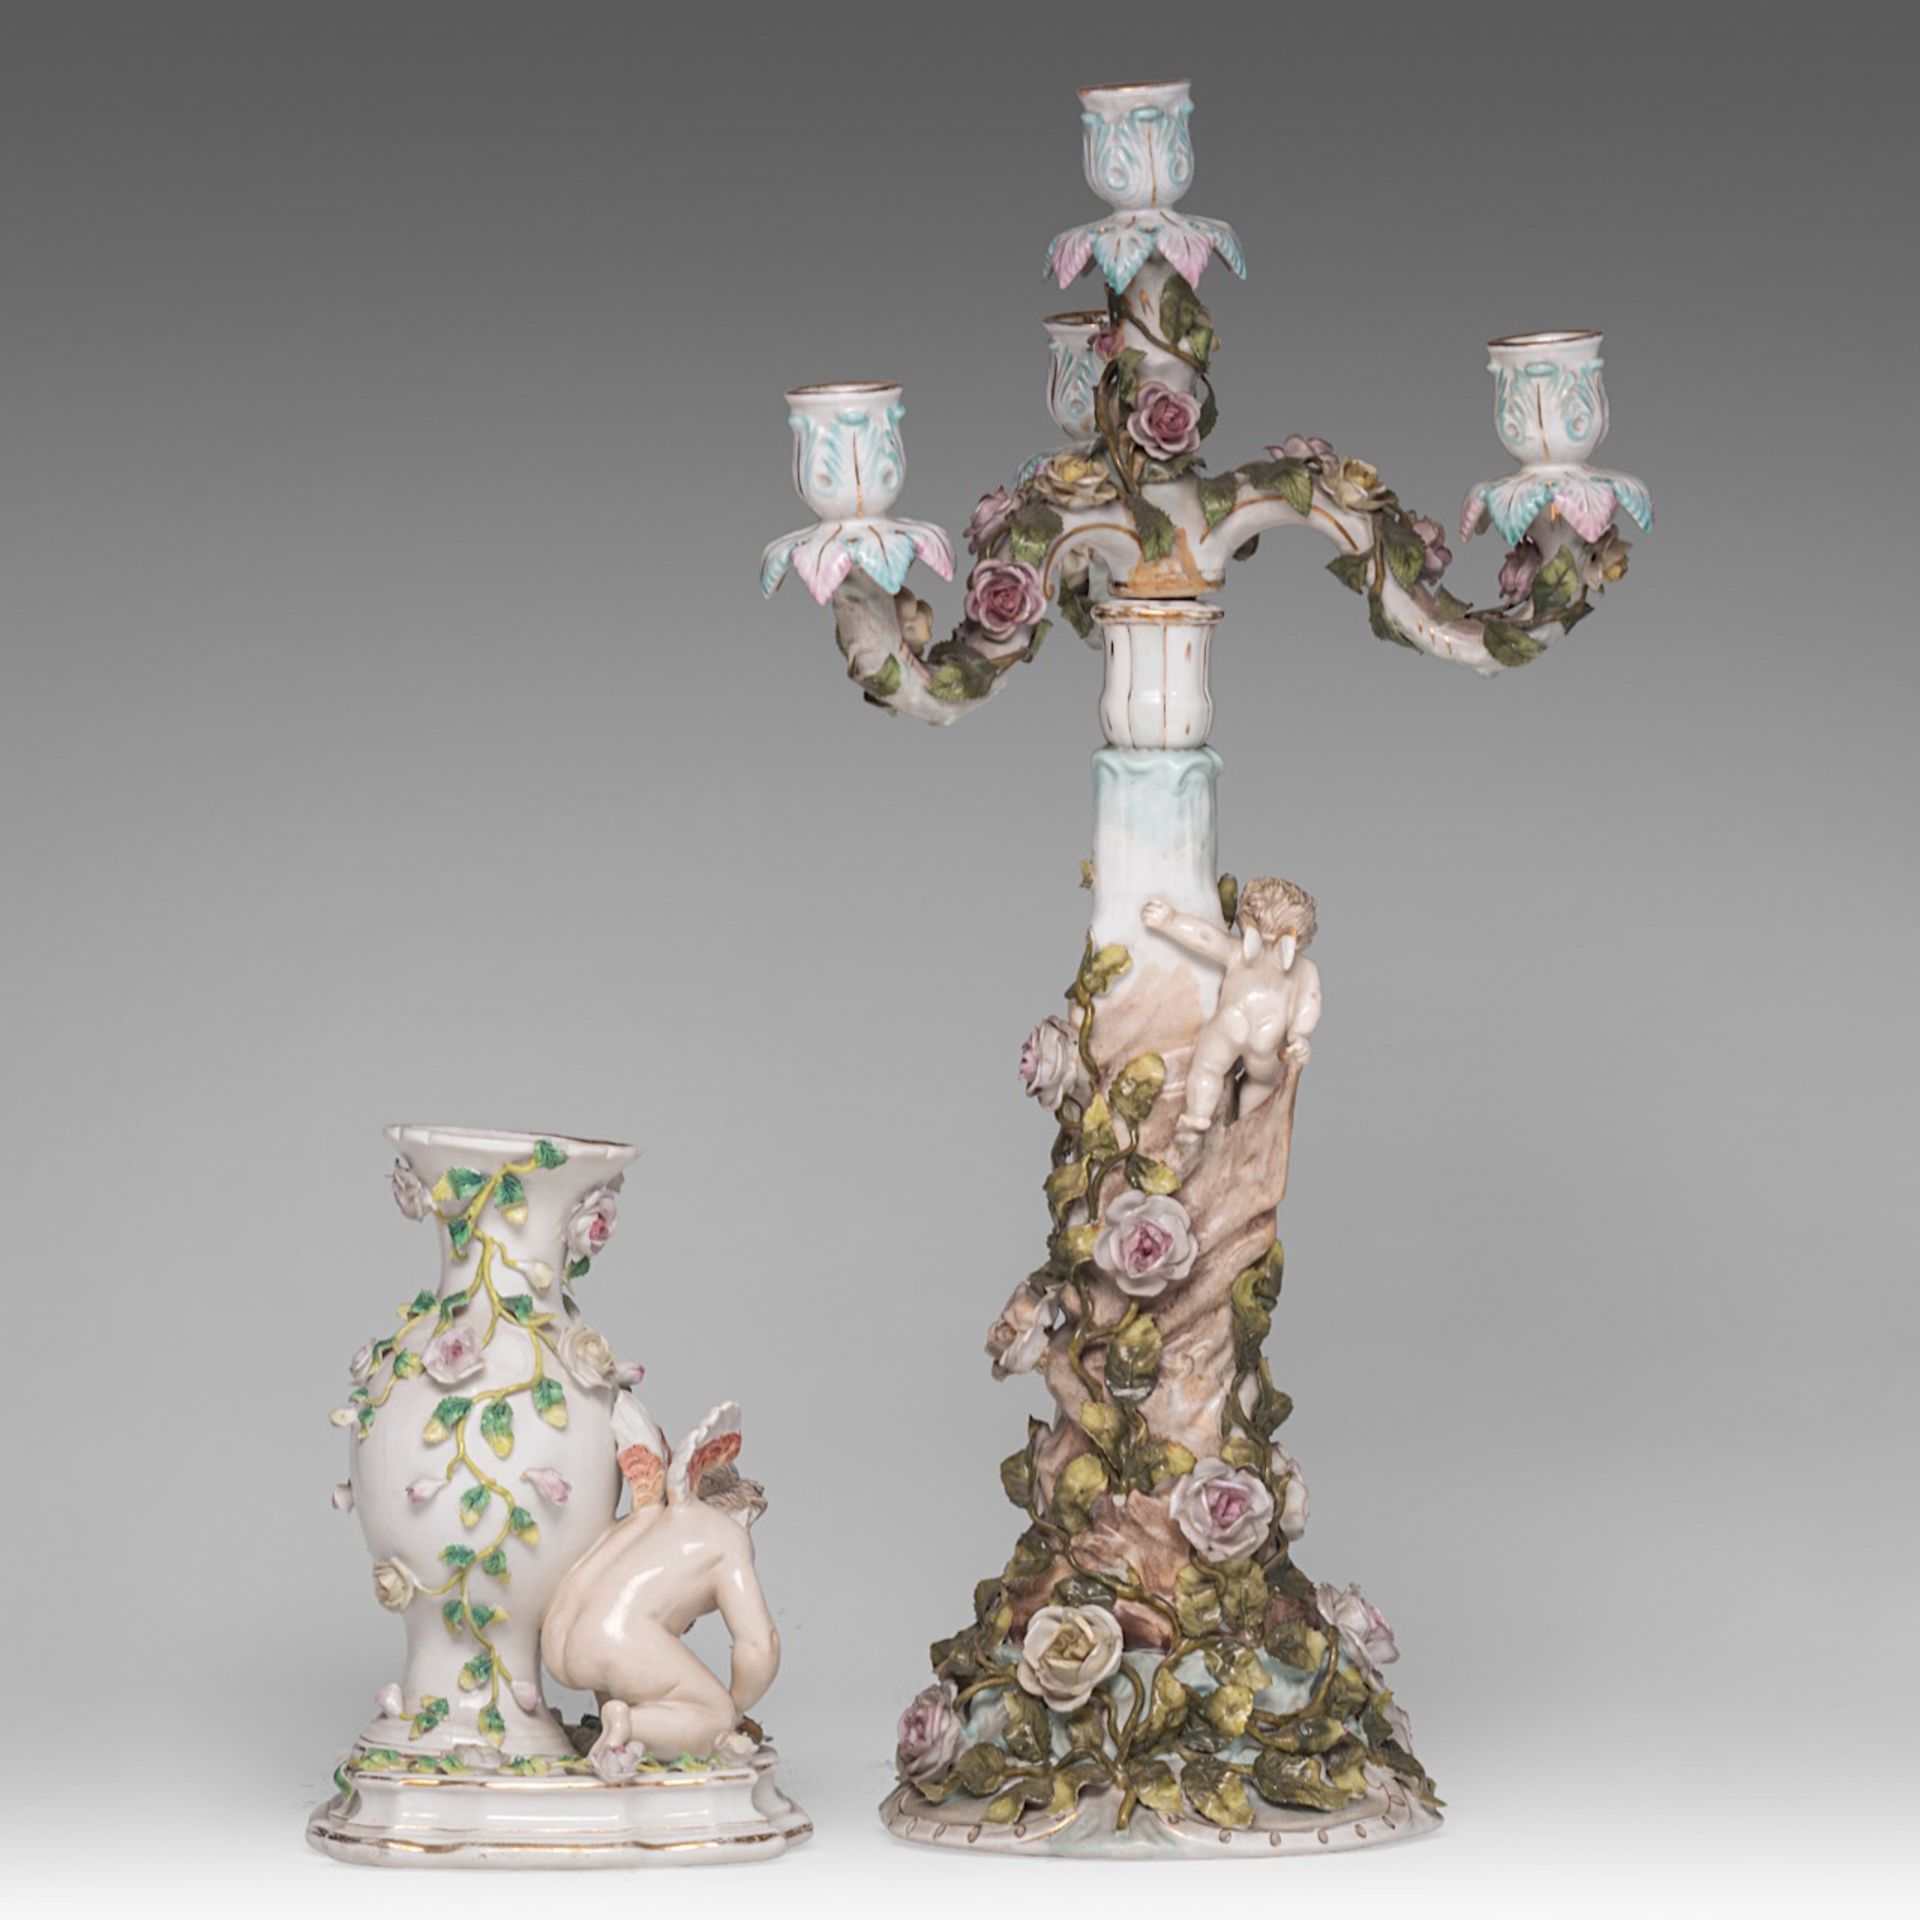 A collection of polychrome decorated Saxon porcelain figurines and a candelabra, H 51,5 cm (tallest) - Image 5 of 13